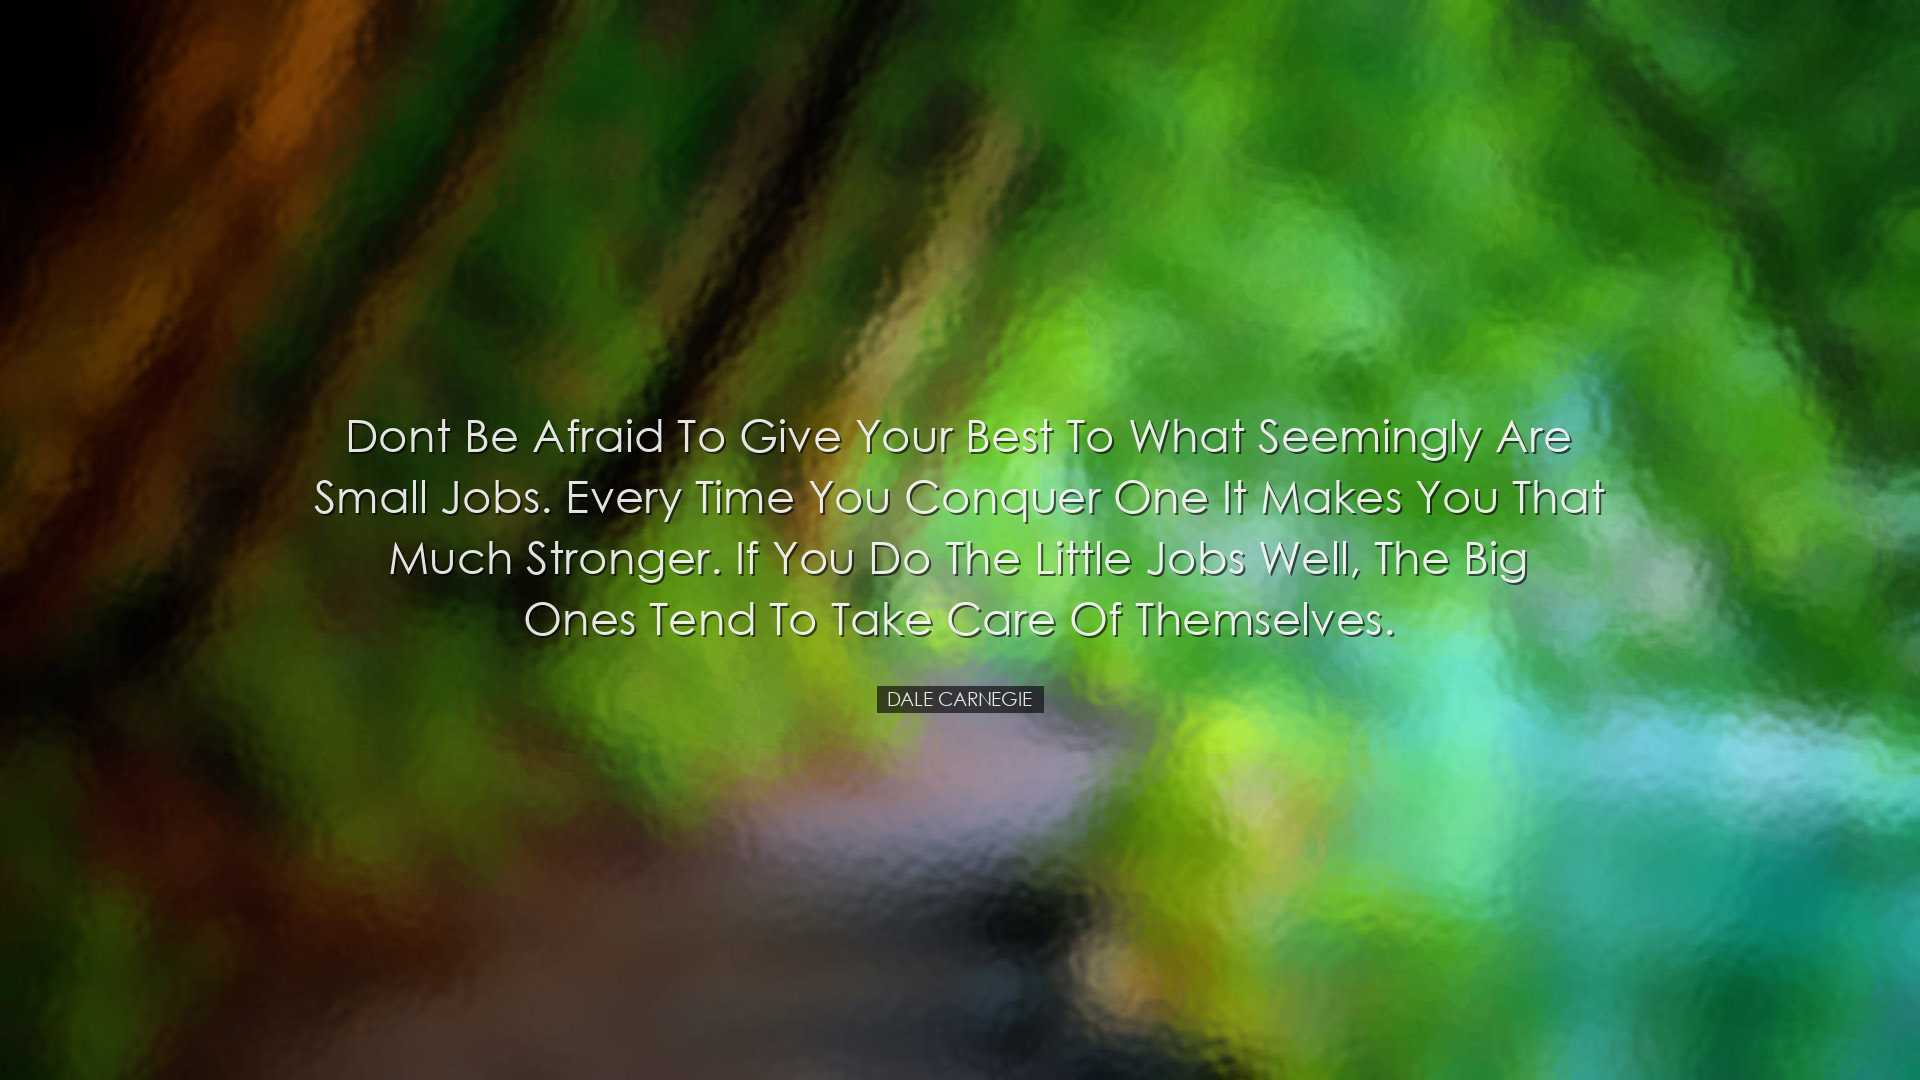 Dont be afraid to give your best to what seemingly are small jobs.